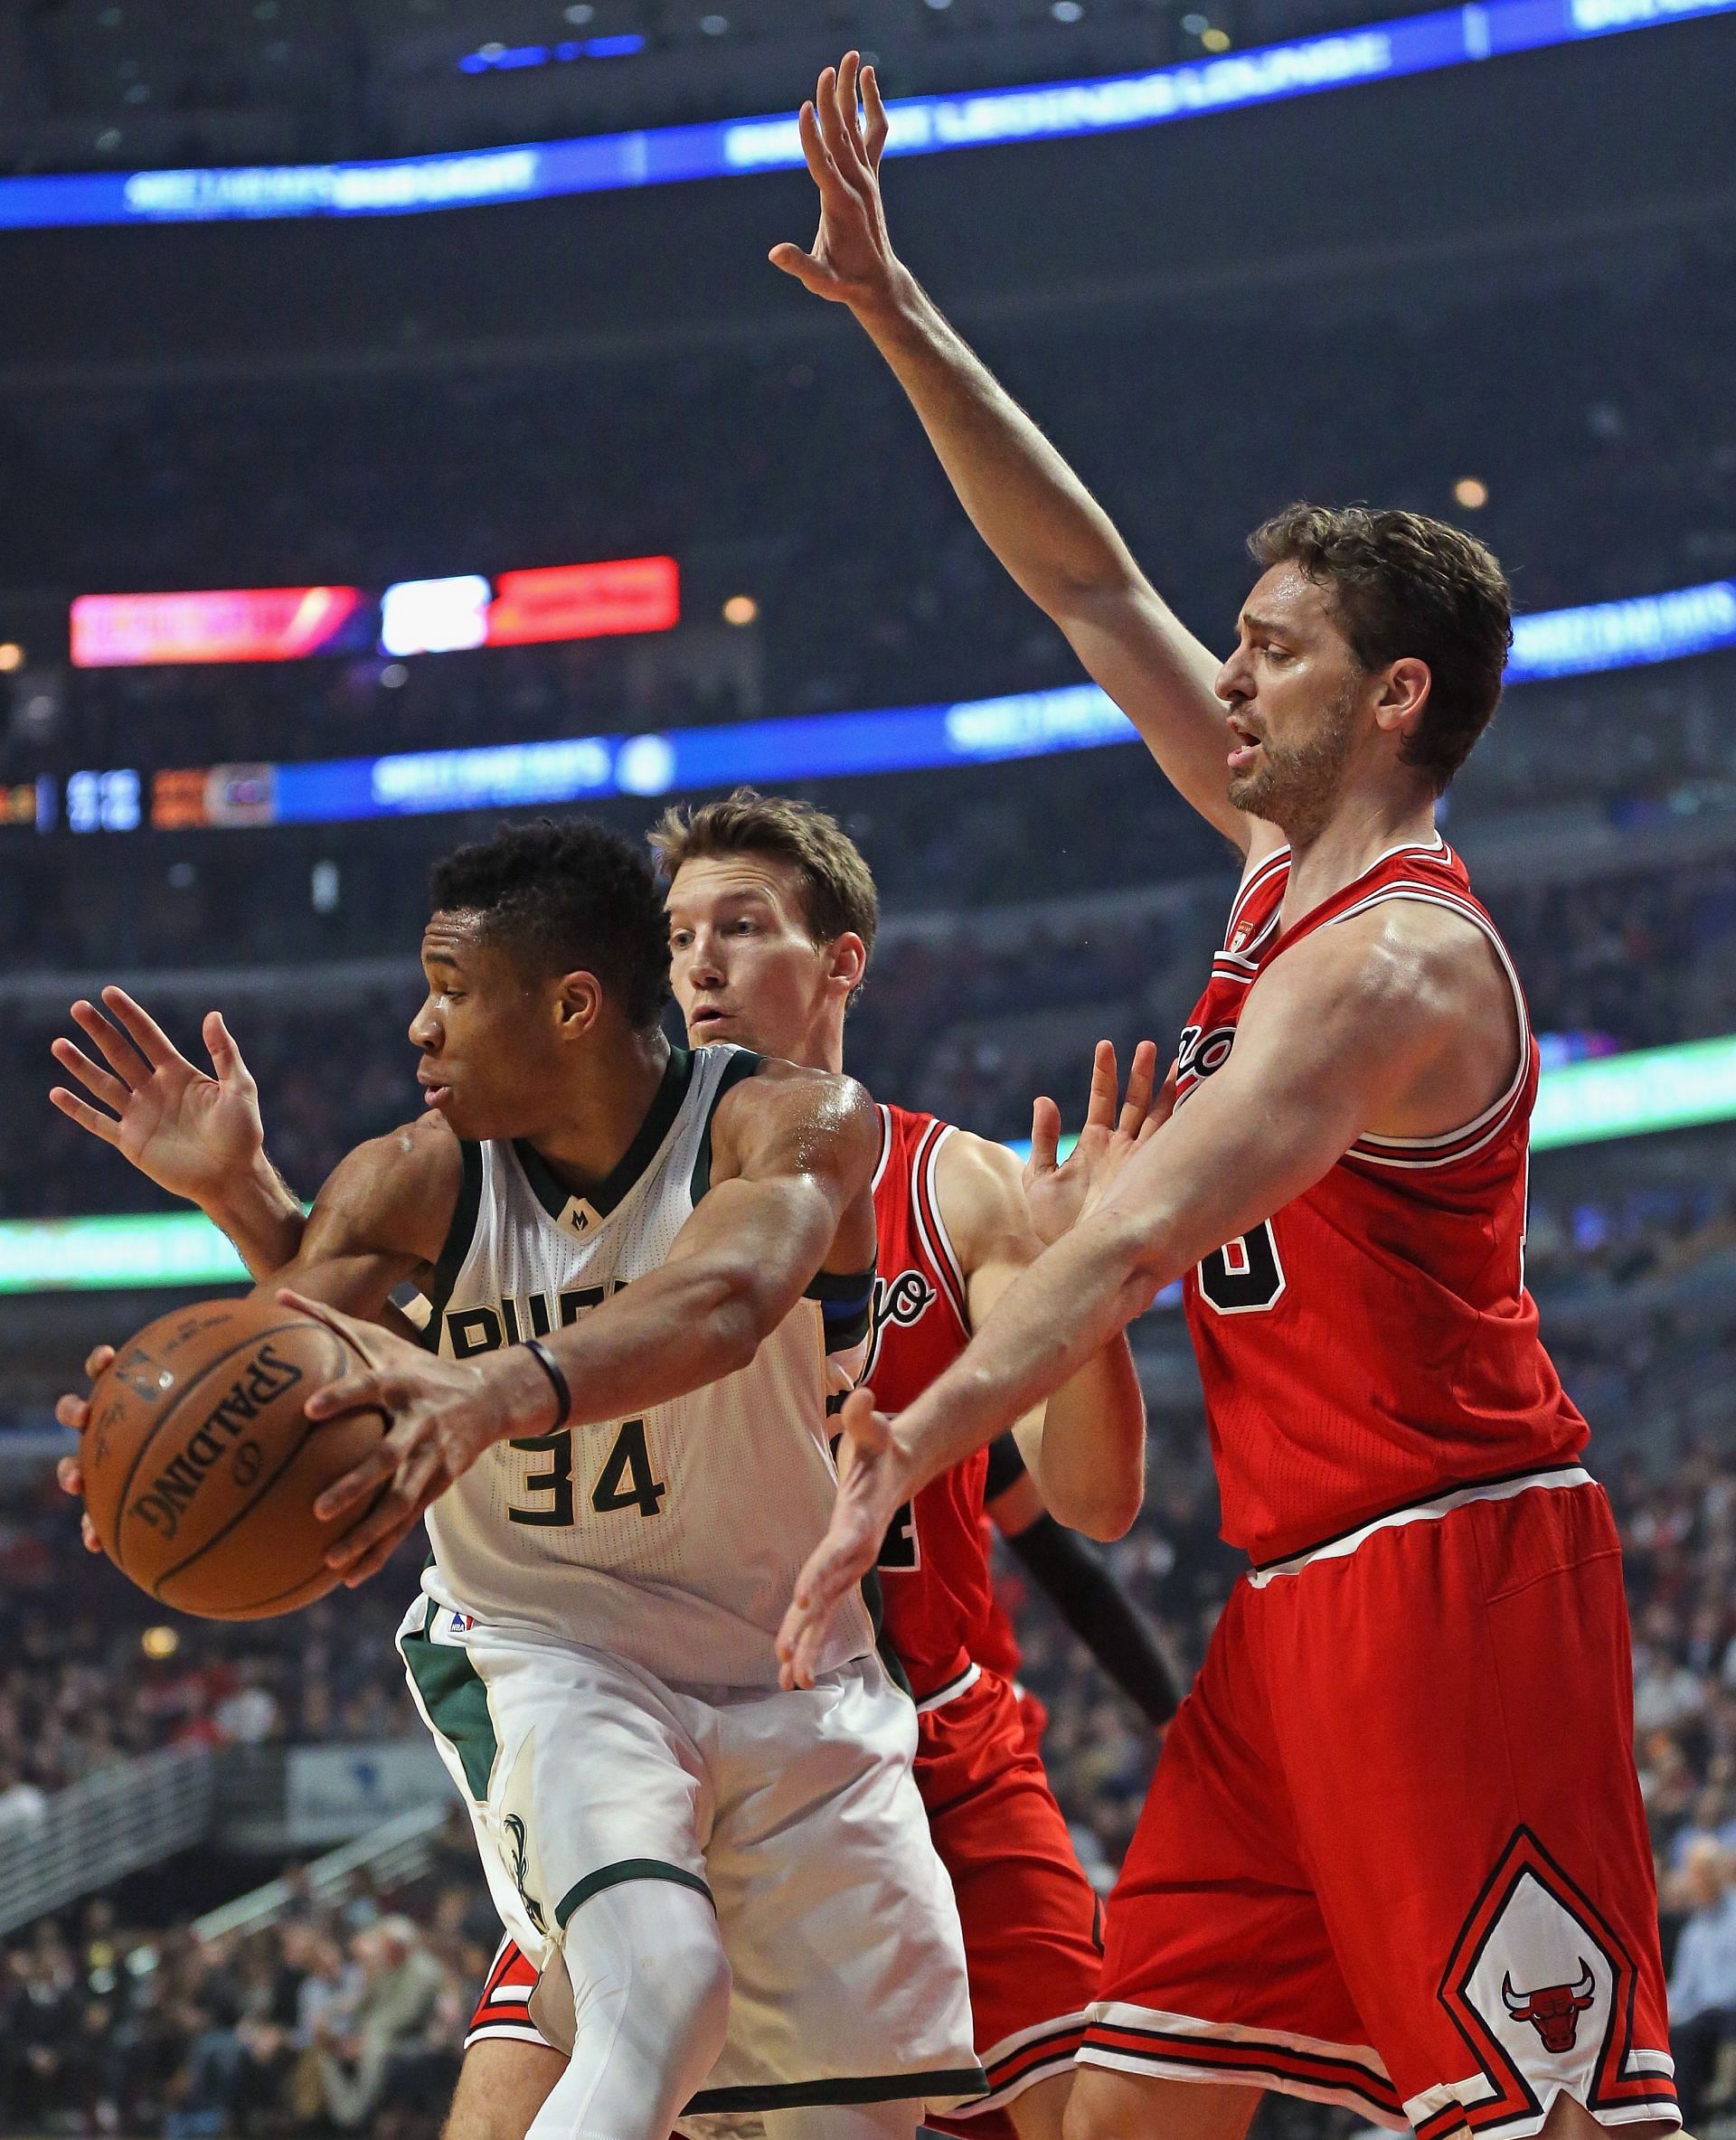 Giannis Antetokounmpo #34 of the Milwaukee Bucks looks to pass under pressure from Mike Dunleavy #34 (L) and Pau Gasol #16 of the Chicago Bulls at the United Center on March 7, 2016 in Chicago, Illinois.